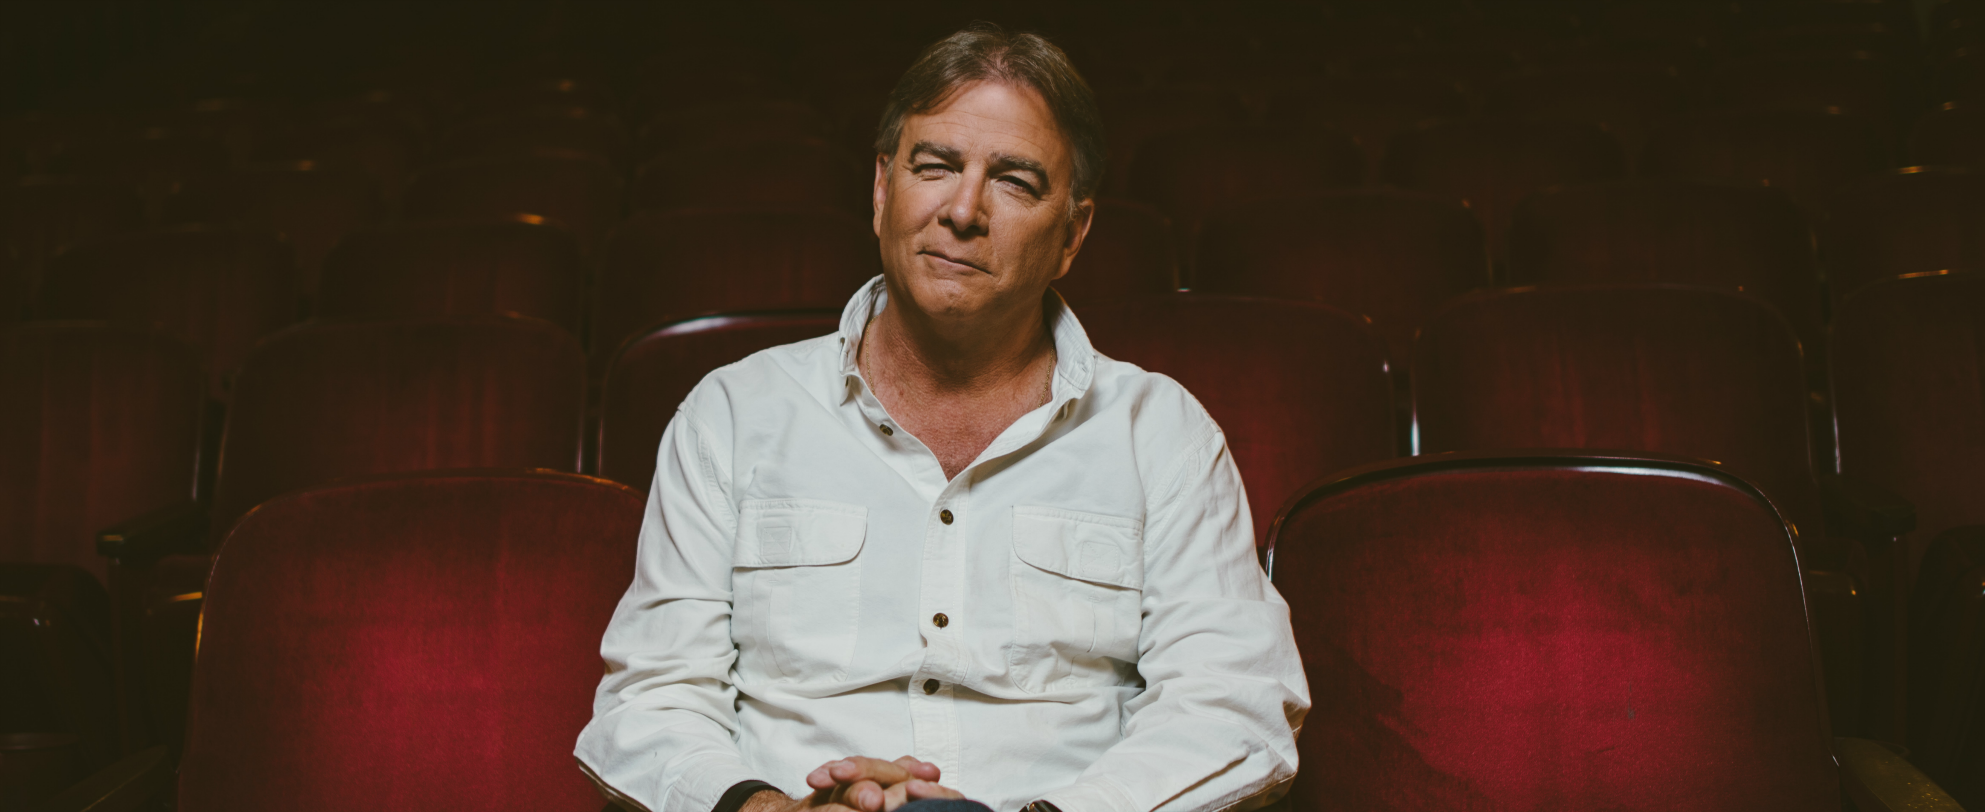 Bill Engvall Comedian, Actor and Writer picture